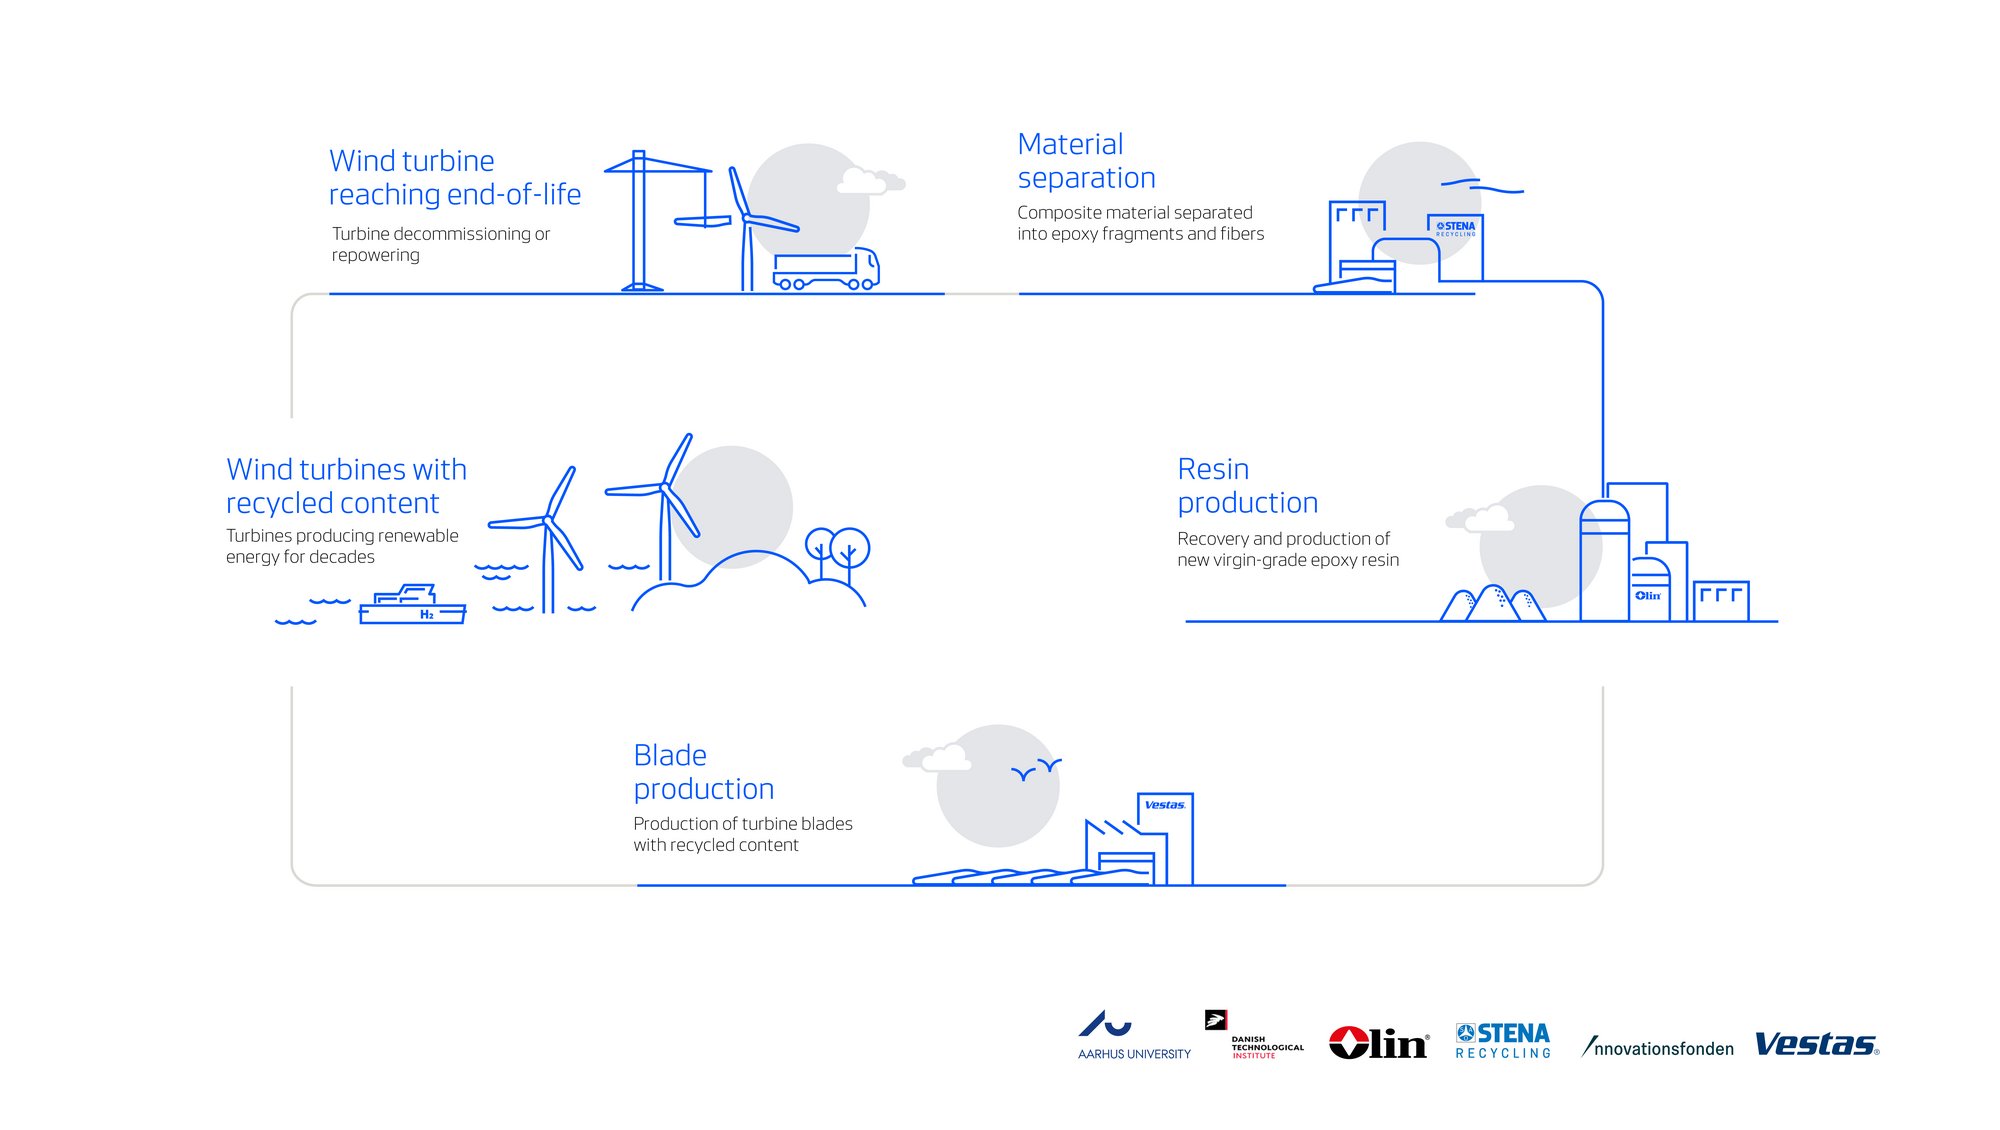 The CETEC (Circular Economy for Thermosets Epoxy Composites) initiative established in May 2021 by Aarhus University, Danish Technological Institute, Olin, and Vestas, and partly funded by the Innovation Fund Denmark focuses on advancing the adoption of a circular economy across the wind industry. The CETEC initiative is a three-year project that builds on the DreamWind initiative and addresses the lack of available recycling technology for epoxy resins. The project not only aims to increase the blade recyclability but also strives for full circularity by enabling to feed recycled materials of old blades back into the production of new blades.